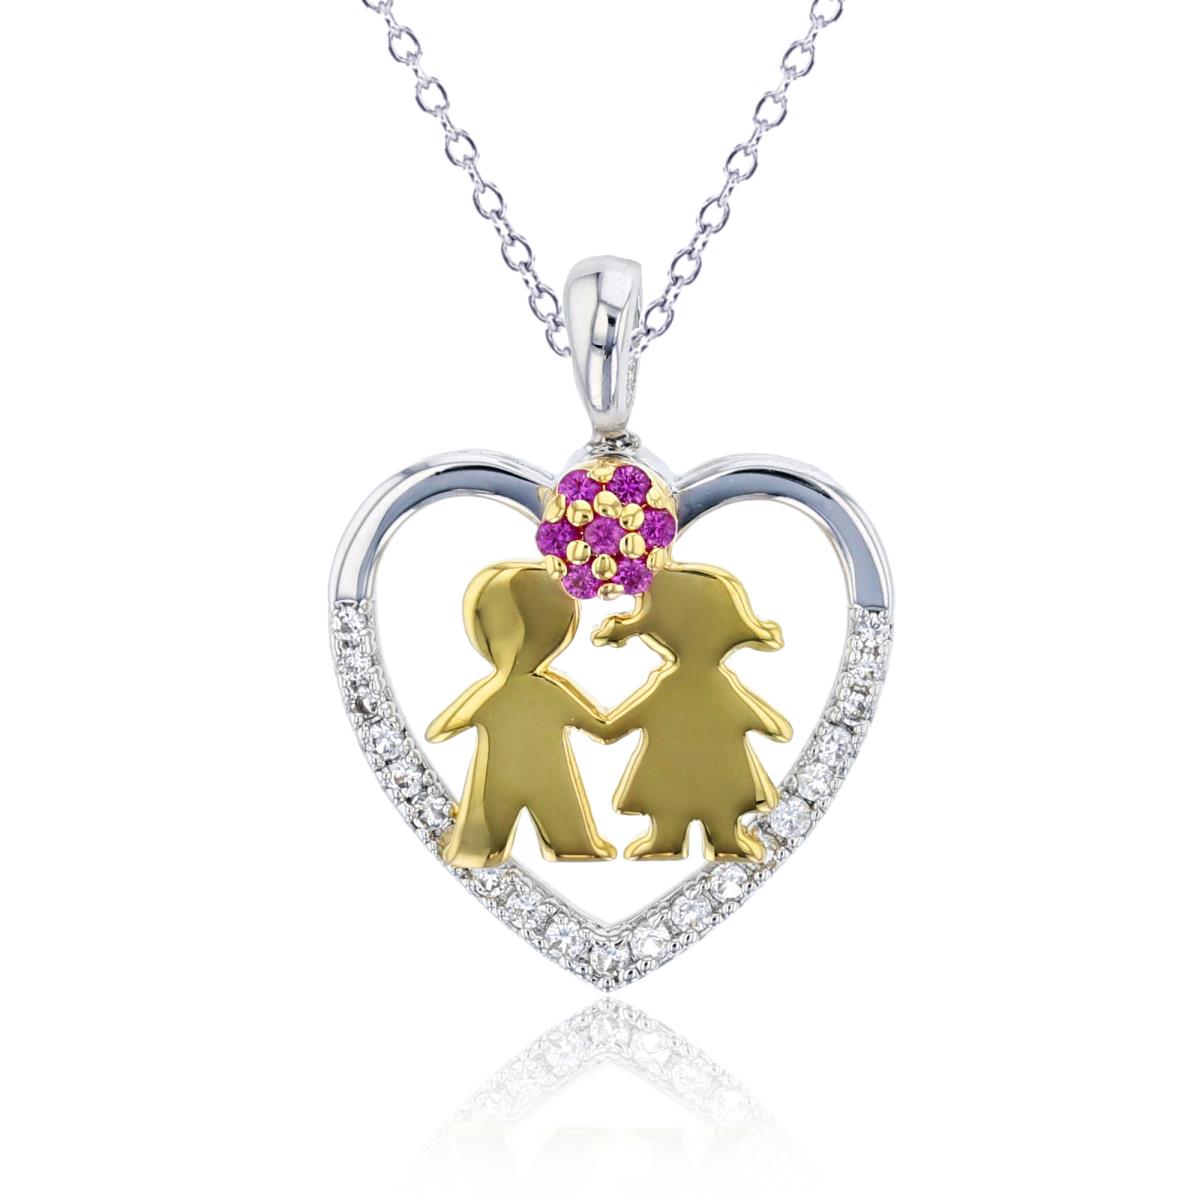 14K White/Yellow Gold Rnd Cr Ruby & Cr White Sap Heart with Boy/Girl 18"Necklace